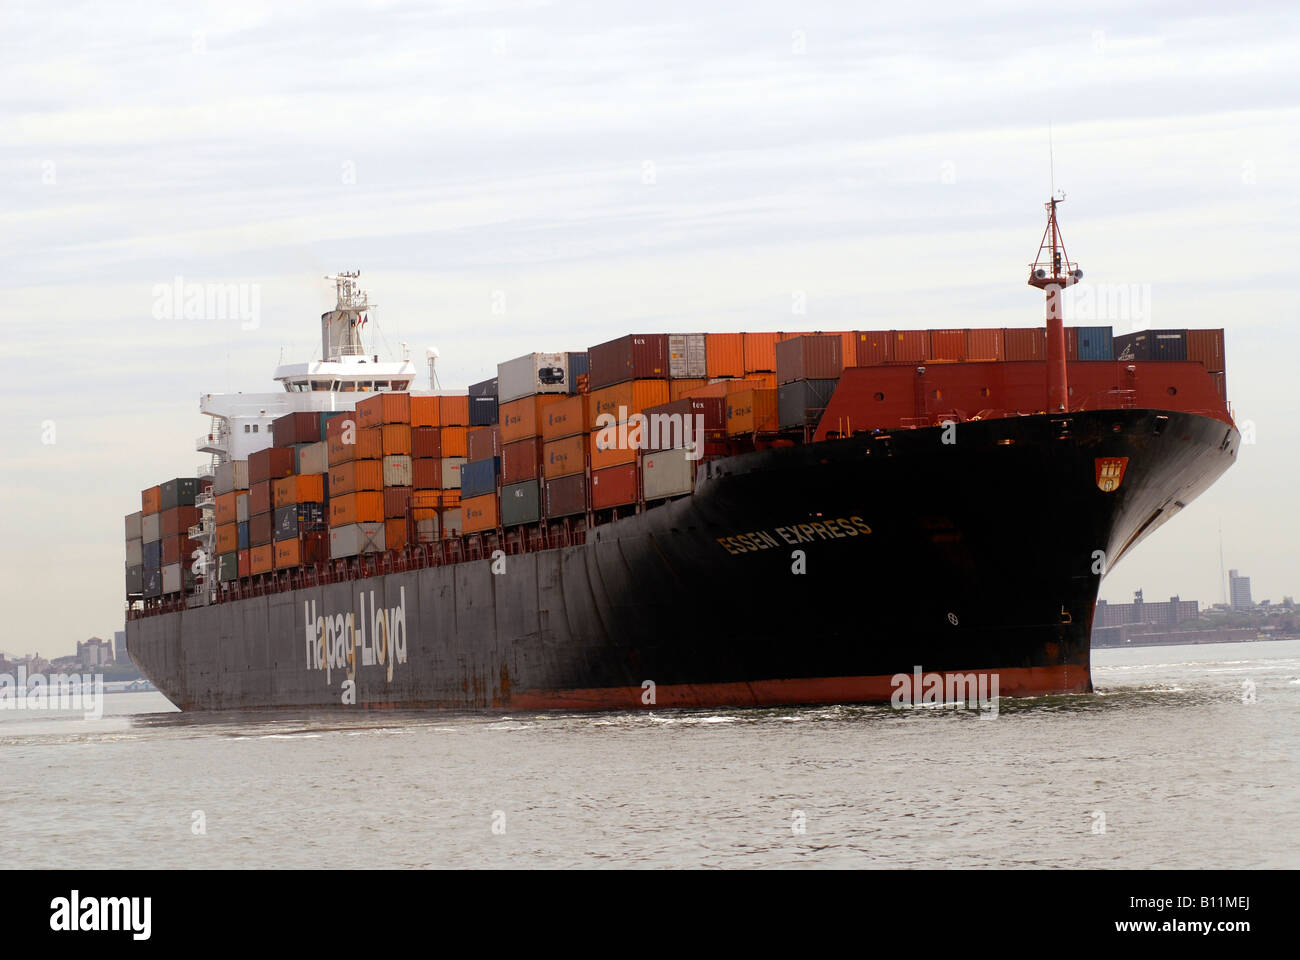 The Essen Express of the Hapag Lloyd line leaves port on the Hudson River North River in New Jersey laden with containers Stock Photo